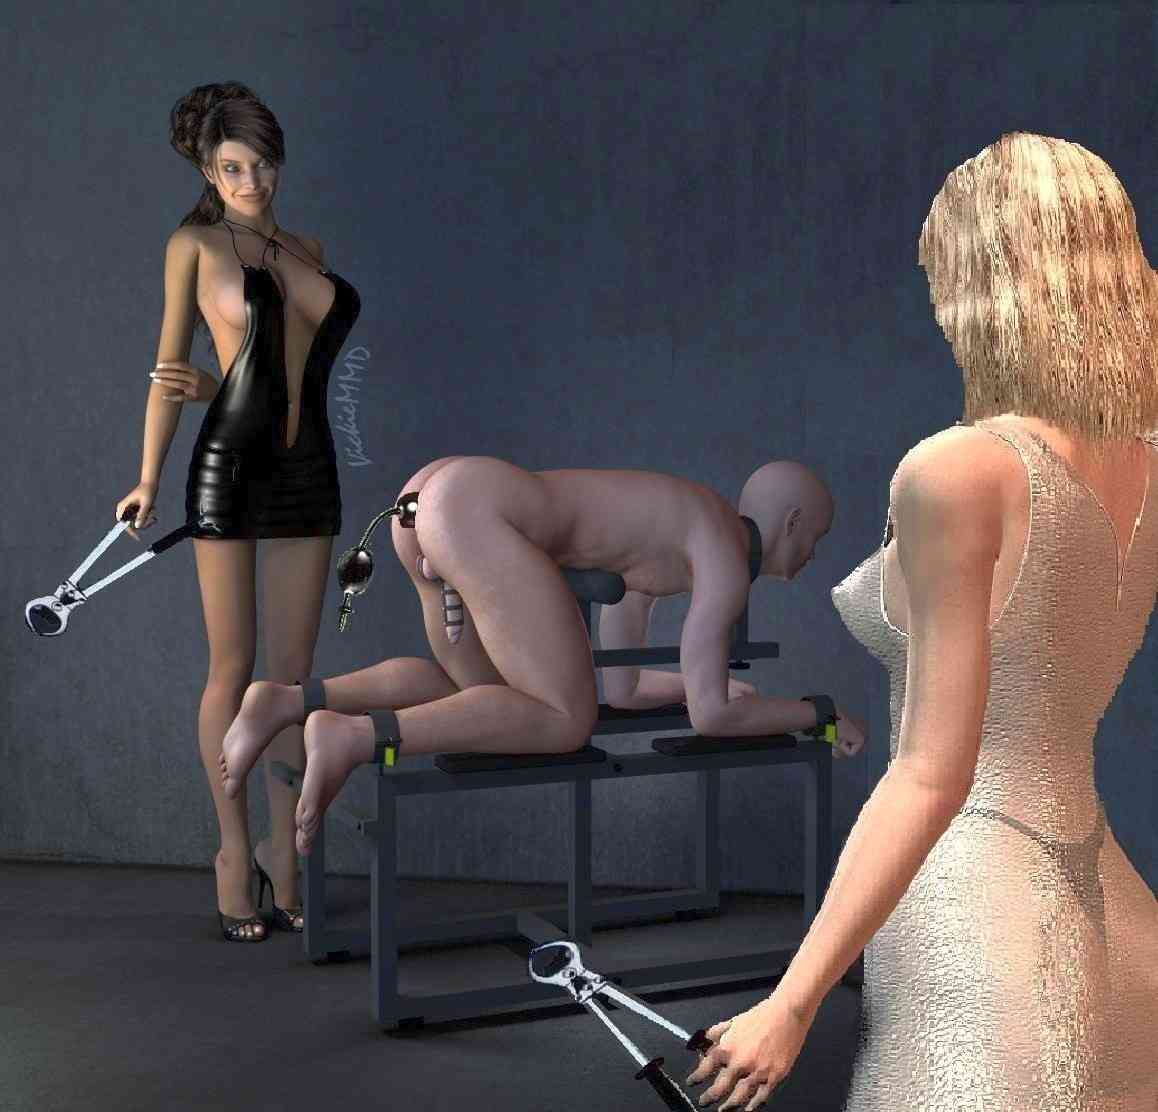 Femdom cock hanging free stories